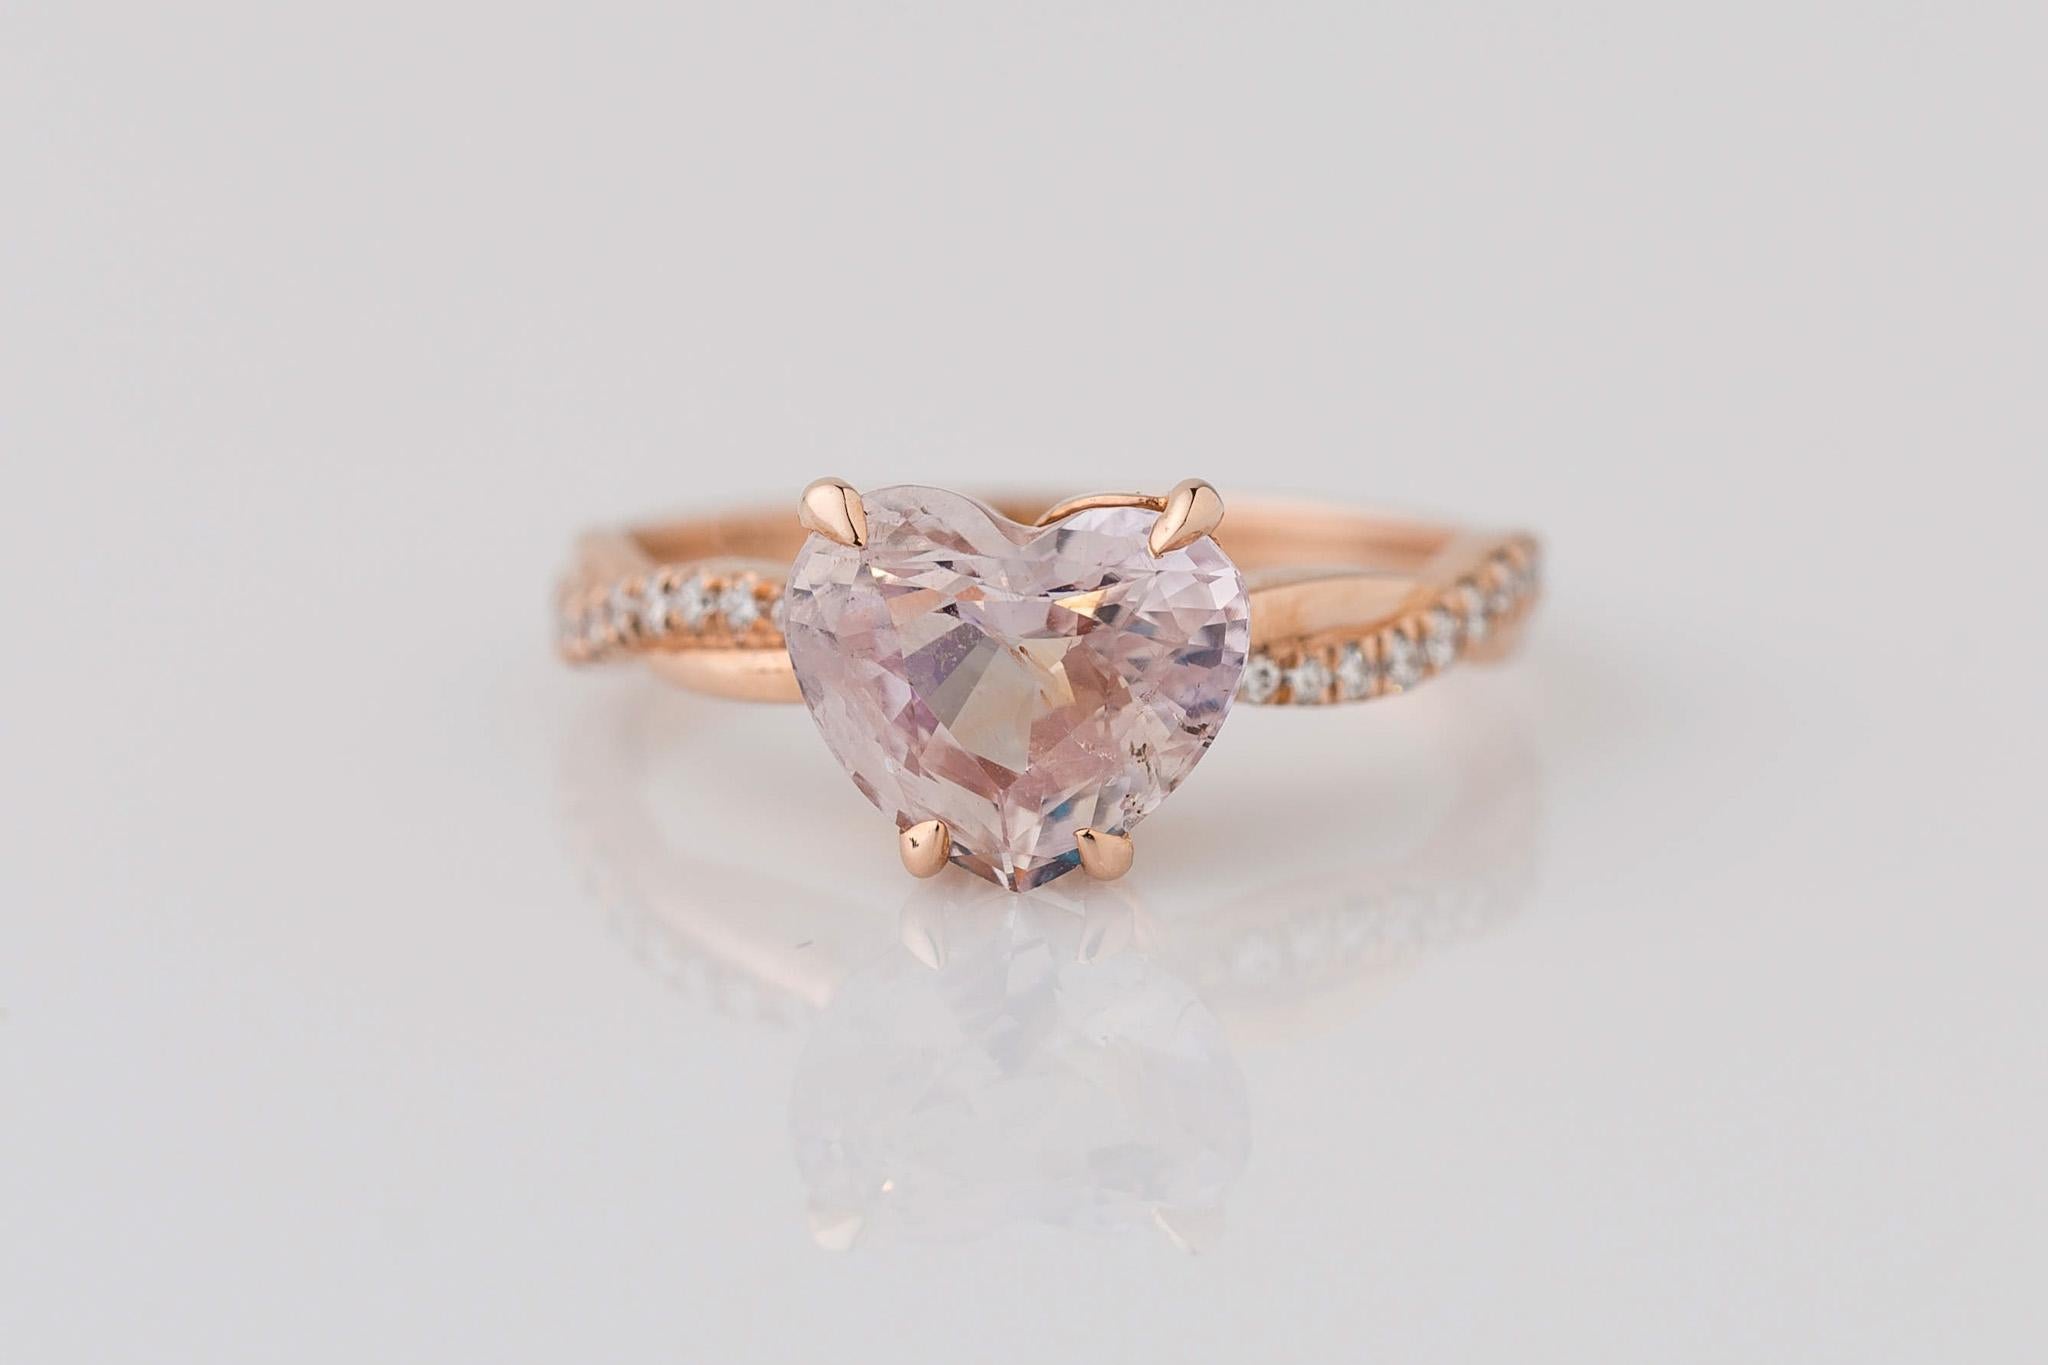 Enchant hearts with our whimsically elegant GIA certified heart shaped pink sapphire diamond twist ring. The star of the show is a dazzling 2.39Ct heart-shaped pink natural sapphire, GIA certified and unheated, measuring 7.28x8.62mm. Sparkling